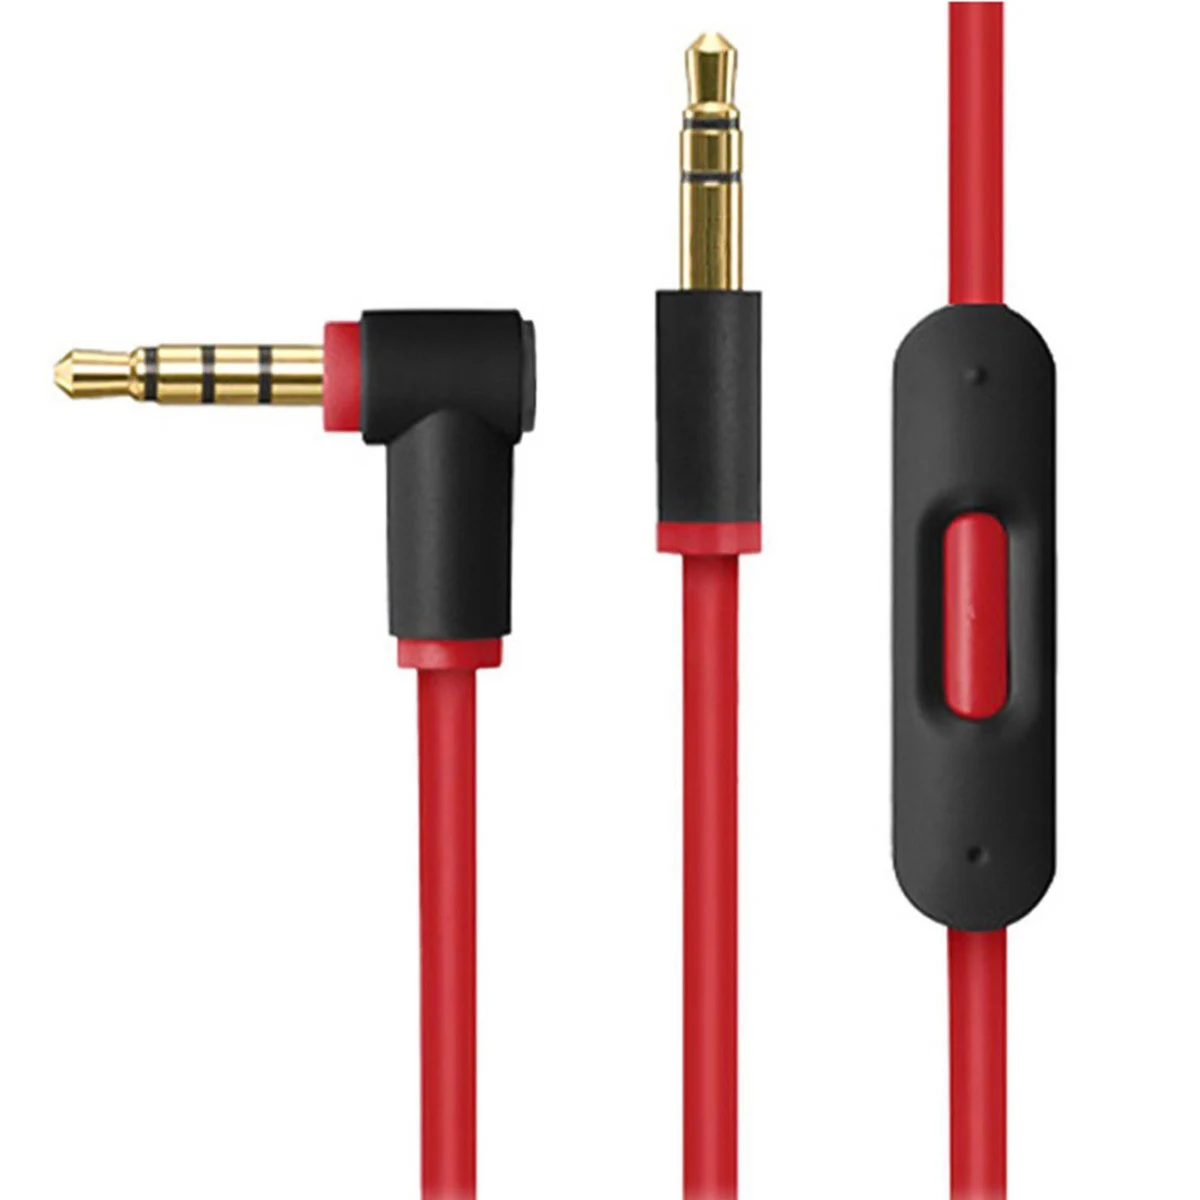 beats replacement cord with mic